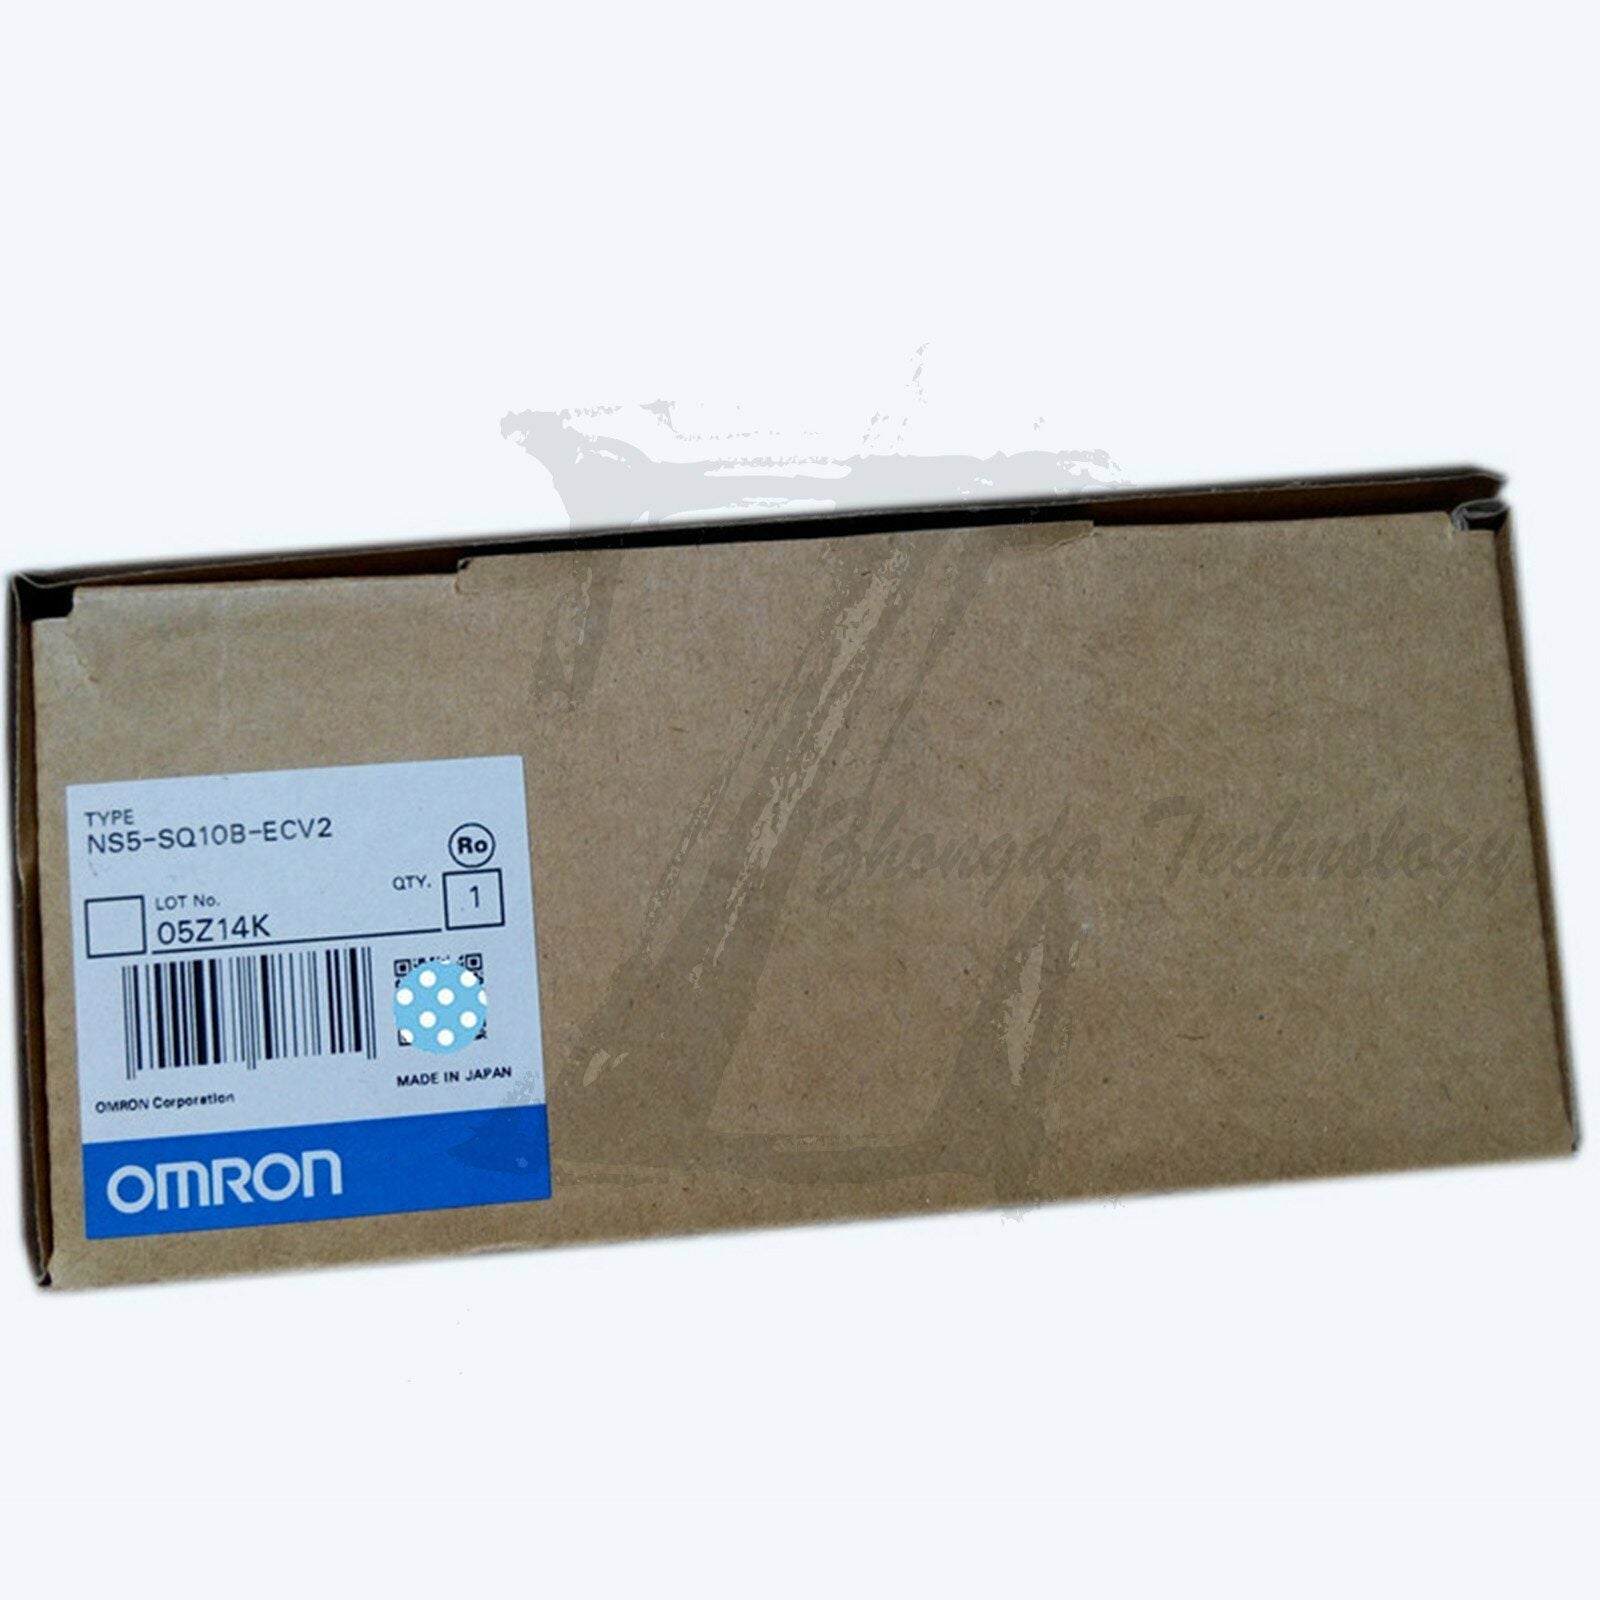 1pc new Omron touch screen NS5-SQ10B-ECV2 one year warranty KOEED 500+, 80%, import_2020_10_10_031751, Omron, Other